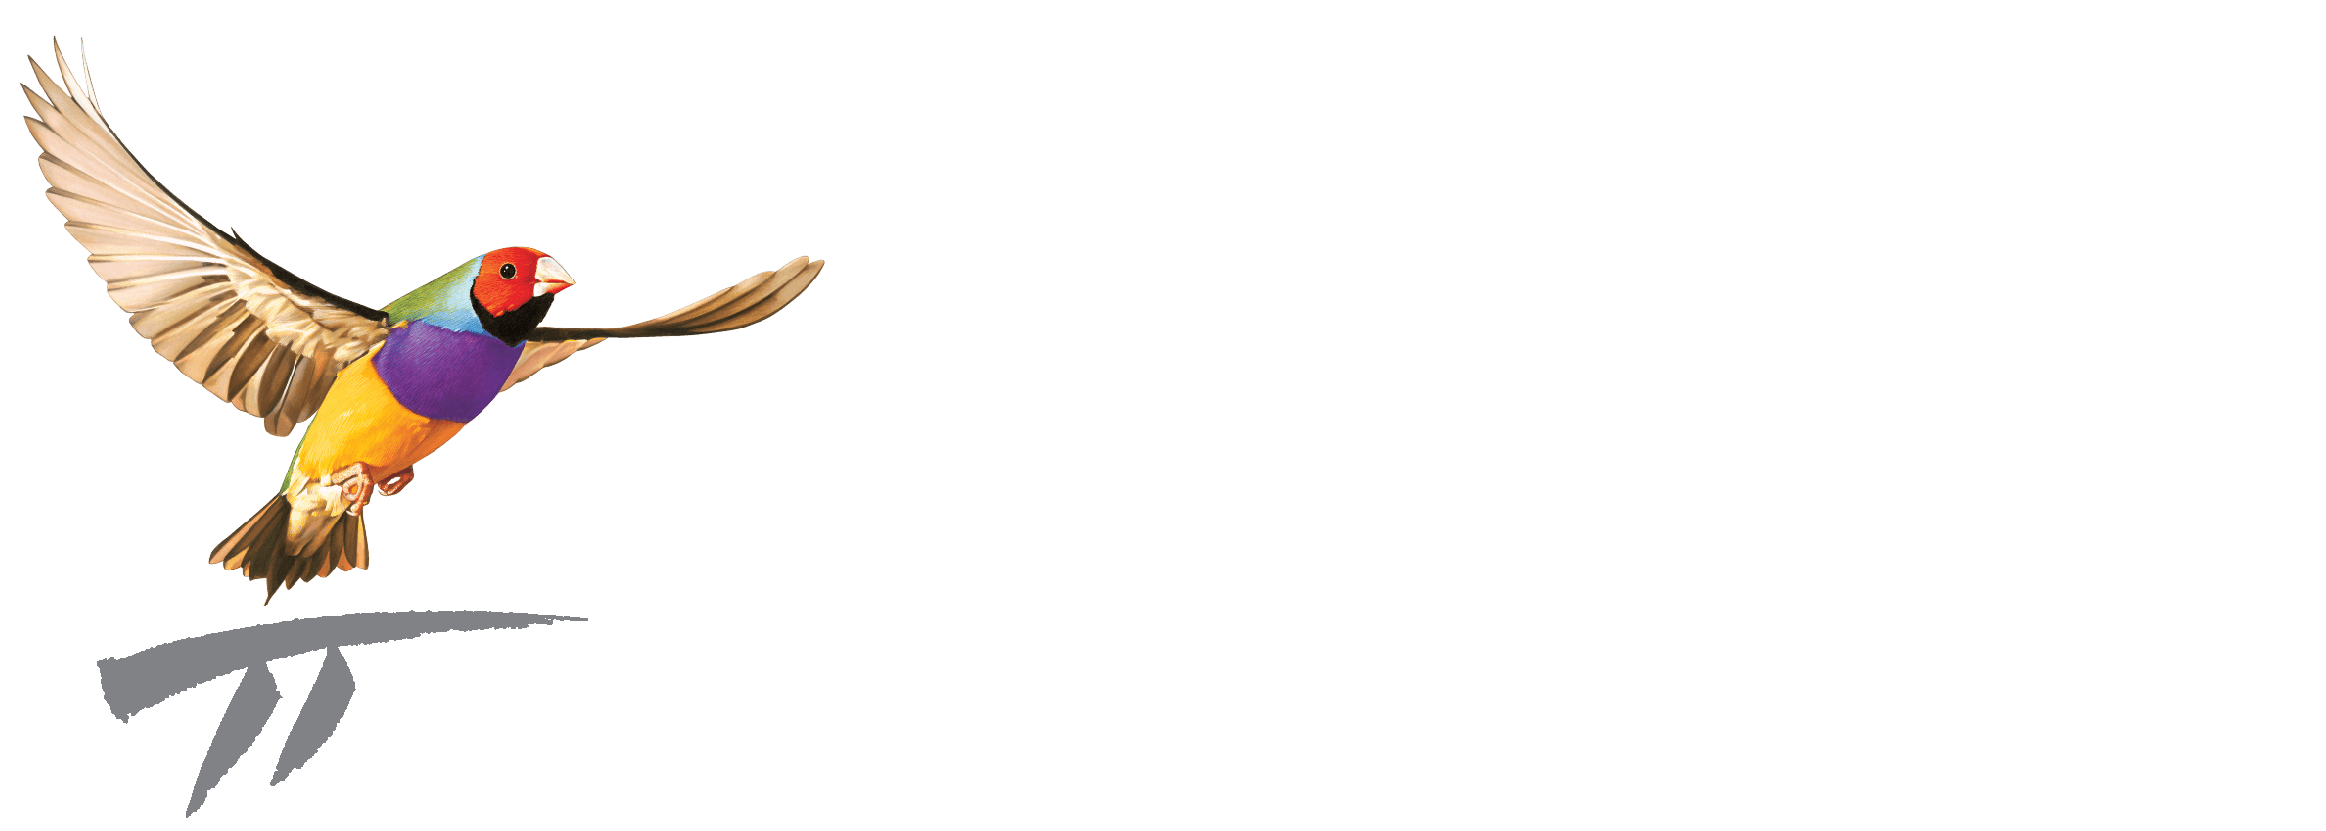 BestPractice_Logo_Large - White with Transparent Background